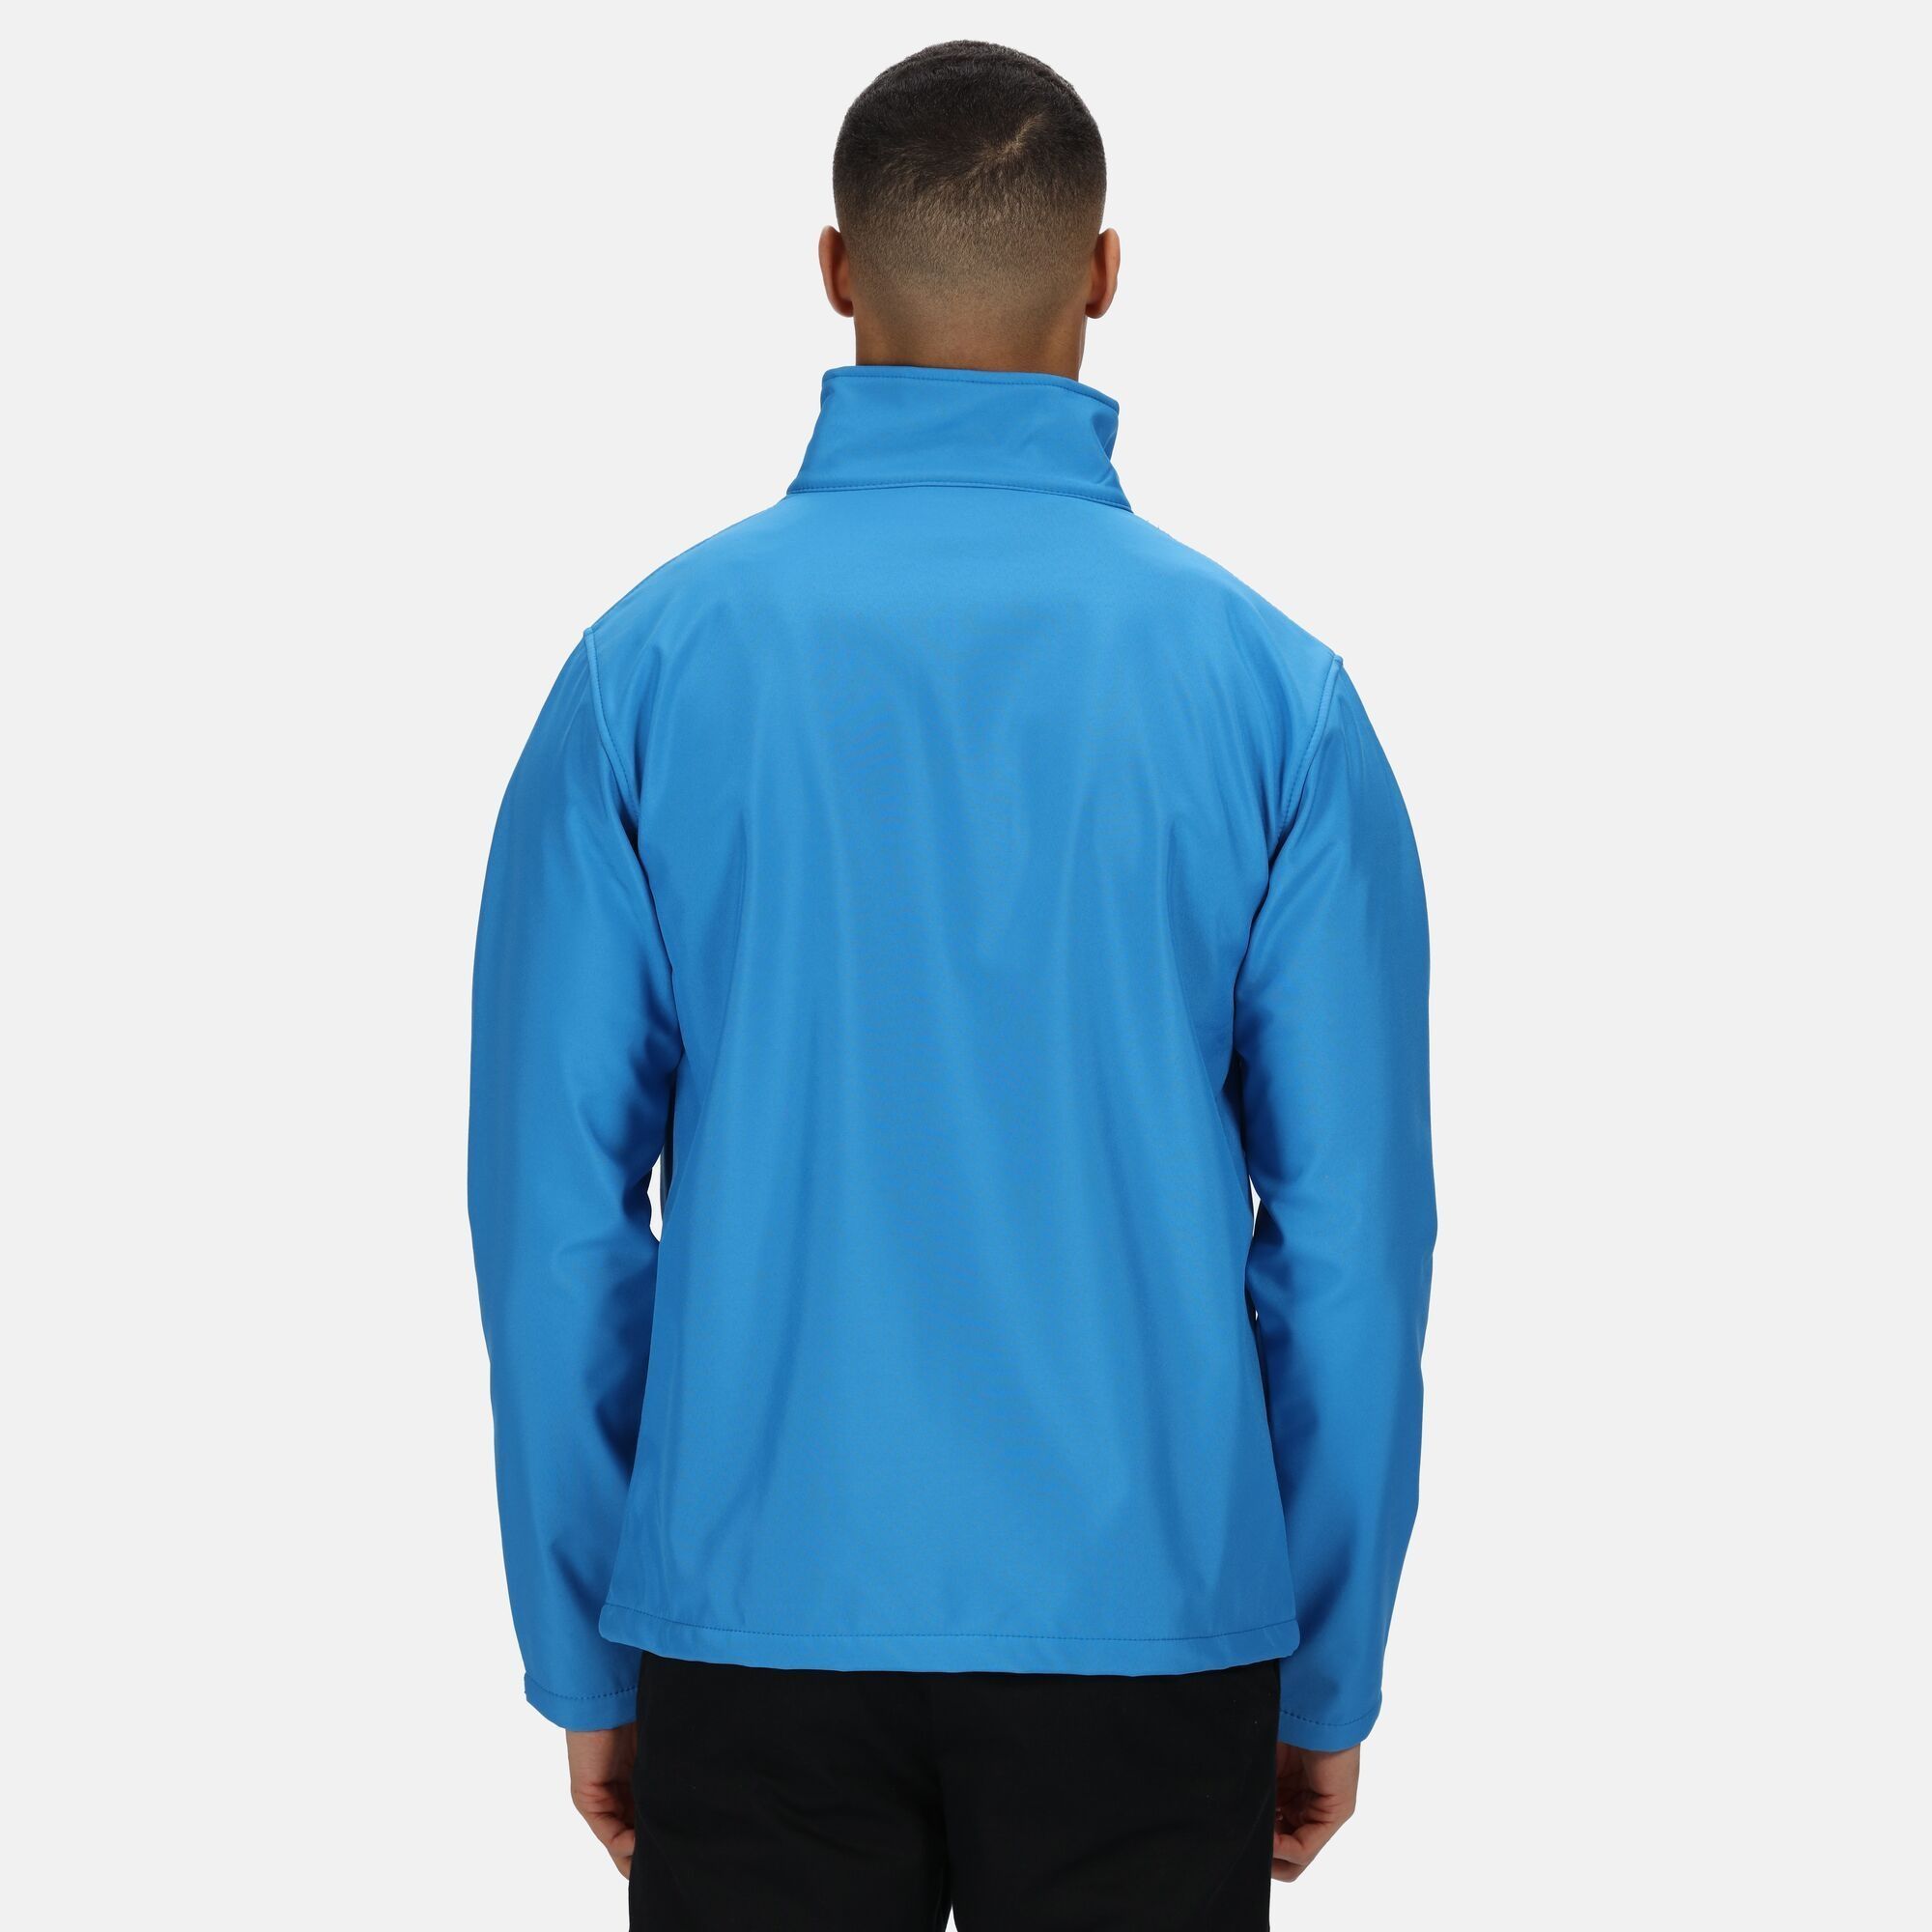 Material: 100% polyester. Warm backed woven. Softshell XPT waterproof and breathable 3 layer membrane fabric. Wind resistant membrane fabric. Atl durable water repellent finish. 2 zipped lower pockets. Zipped chest pocket. Chest sizes to fit: (S): 94-96.5cm, (M): 99-101.5cm, (L): 104-106.5cm, (XL): 109-112cm, (XXL): 117-122cm, (3XL): 124.5-129.5cm.